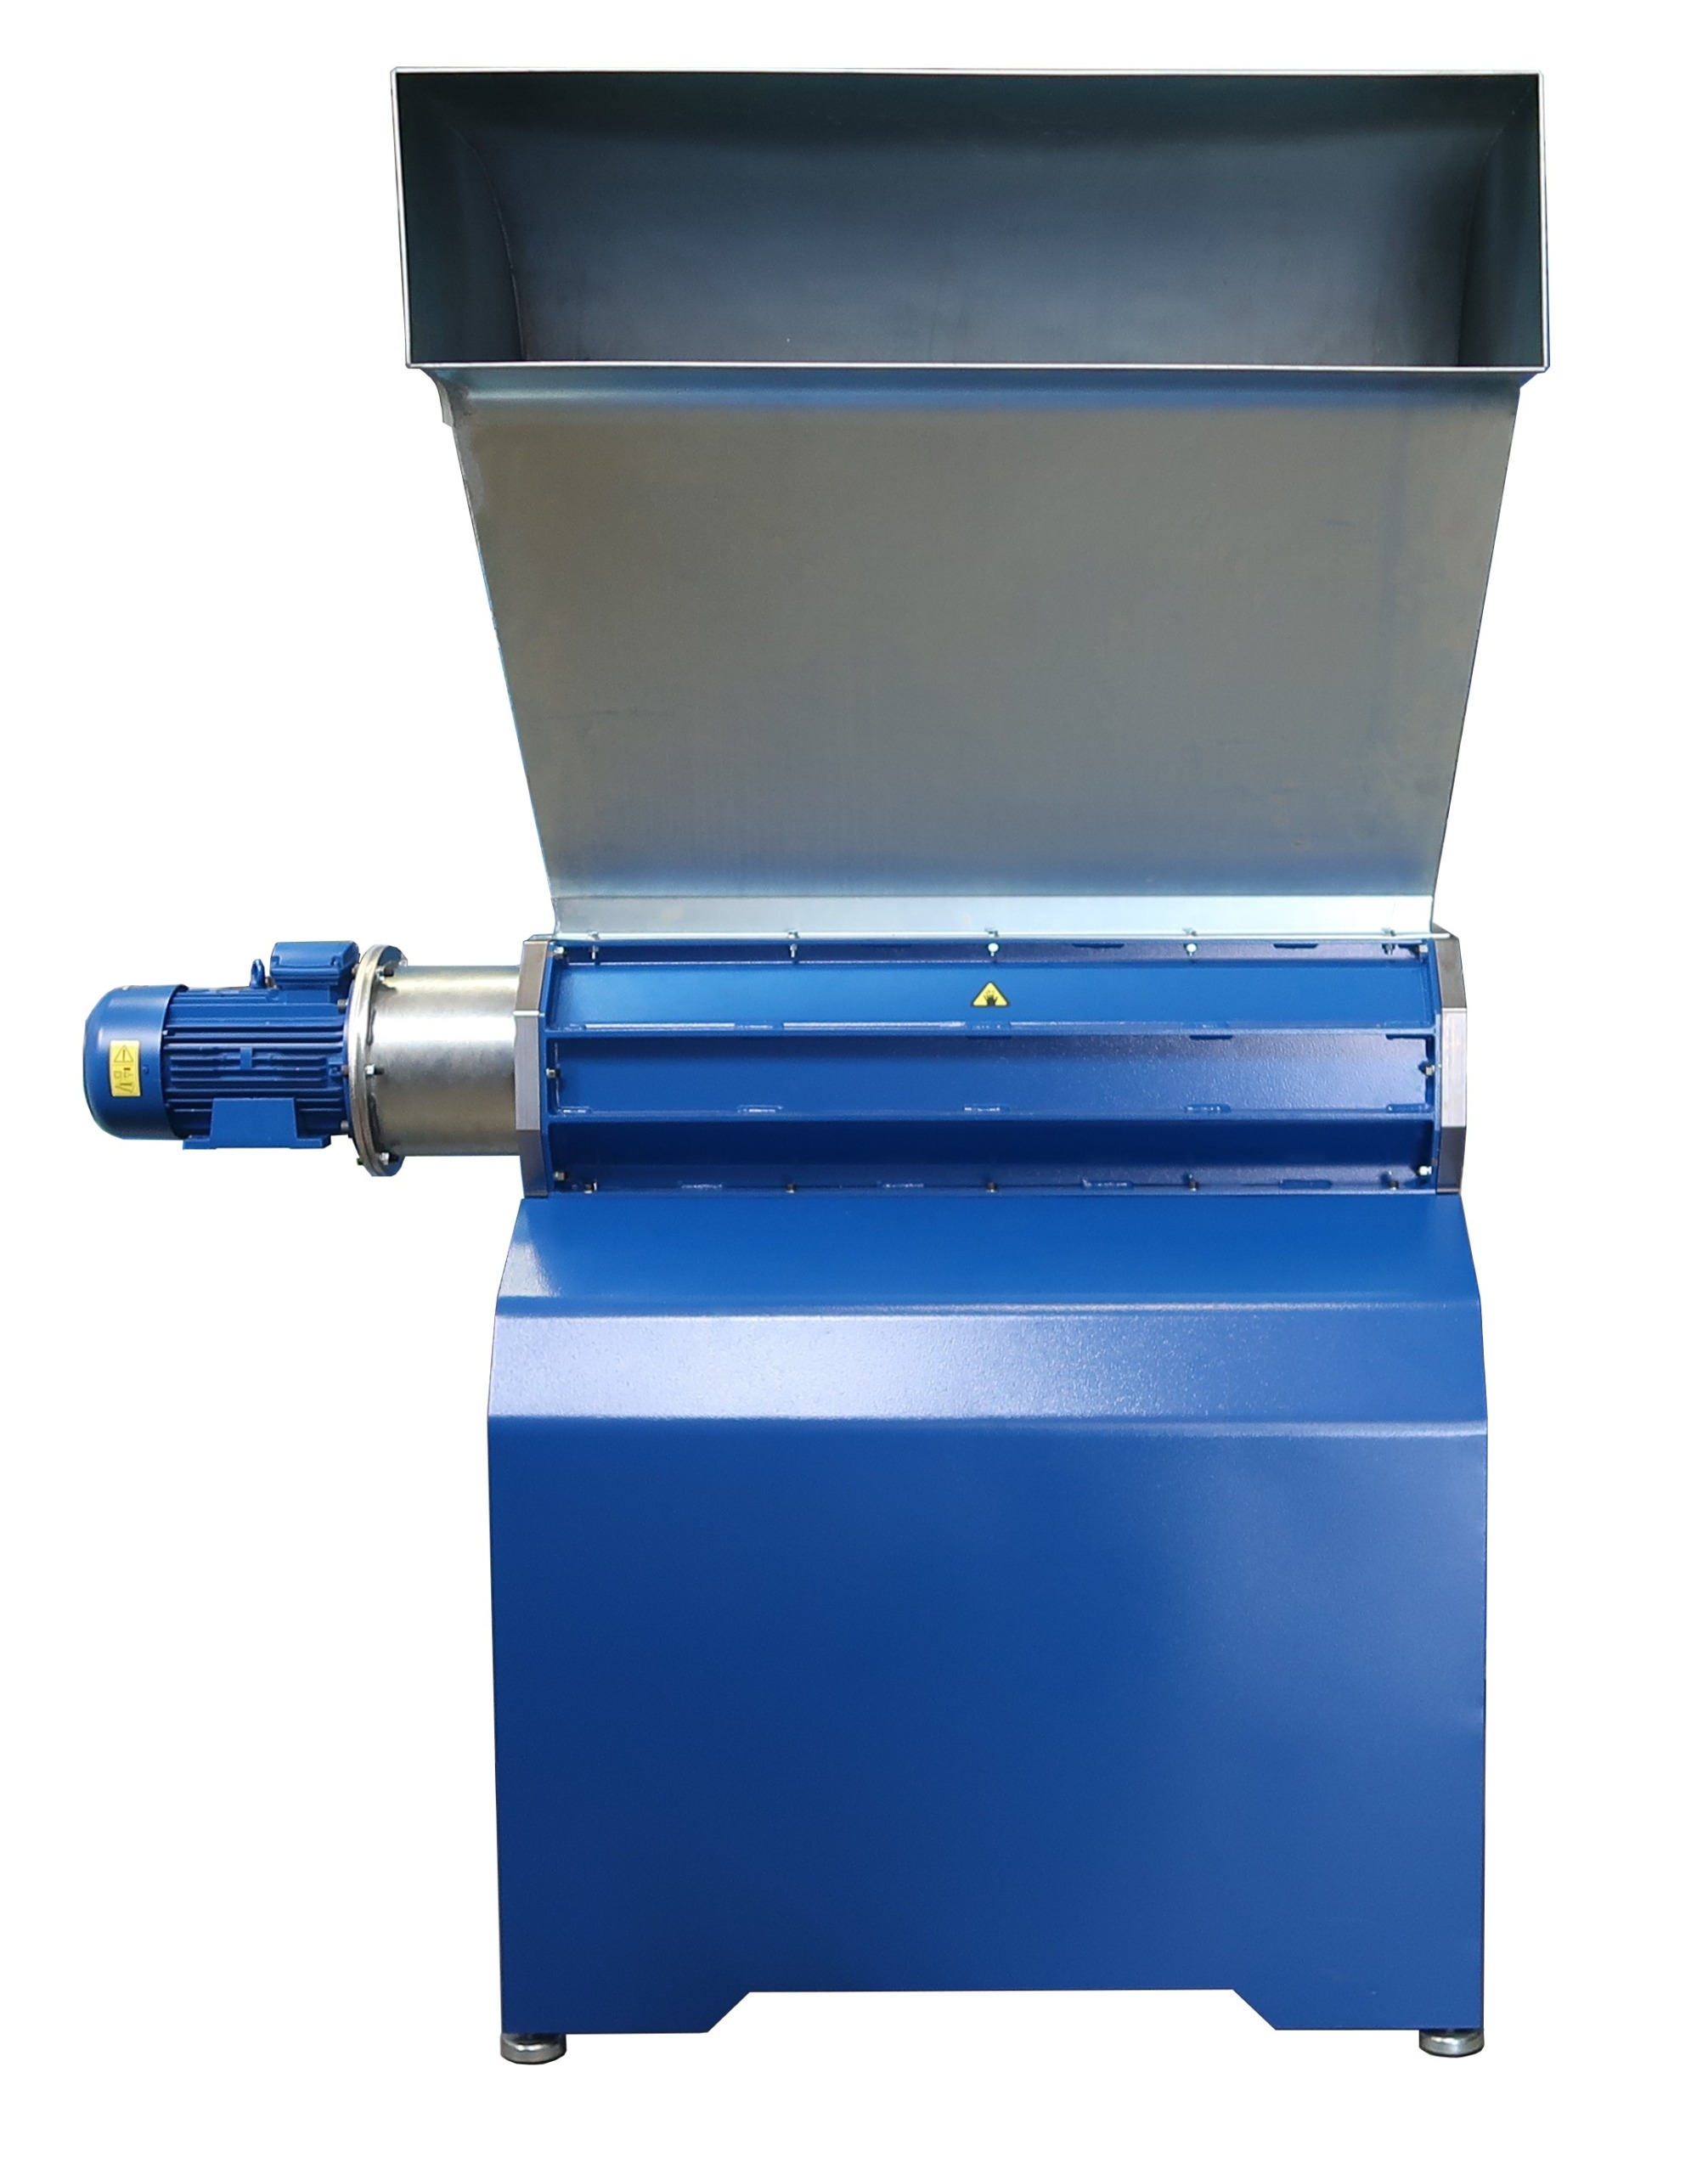 SheetCutter 1100 with funnel